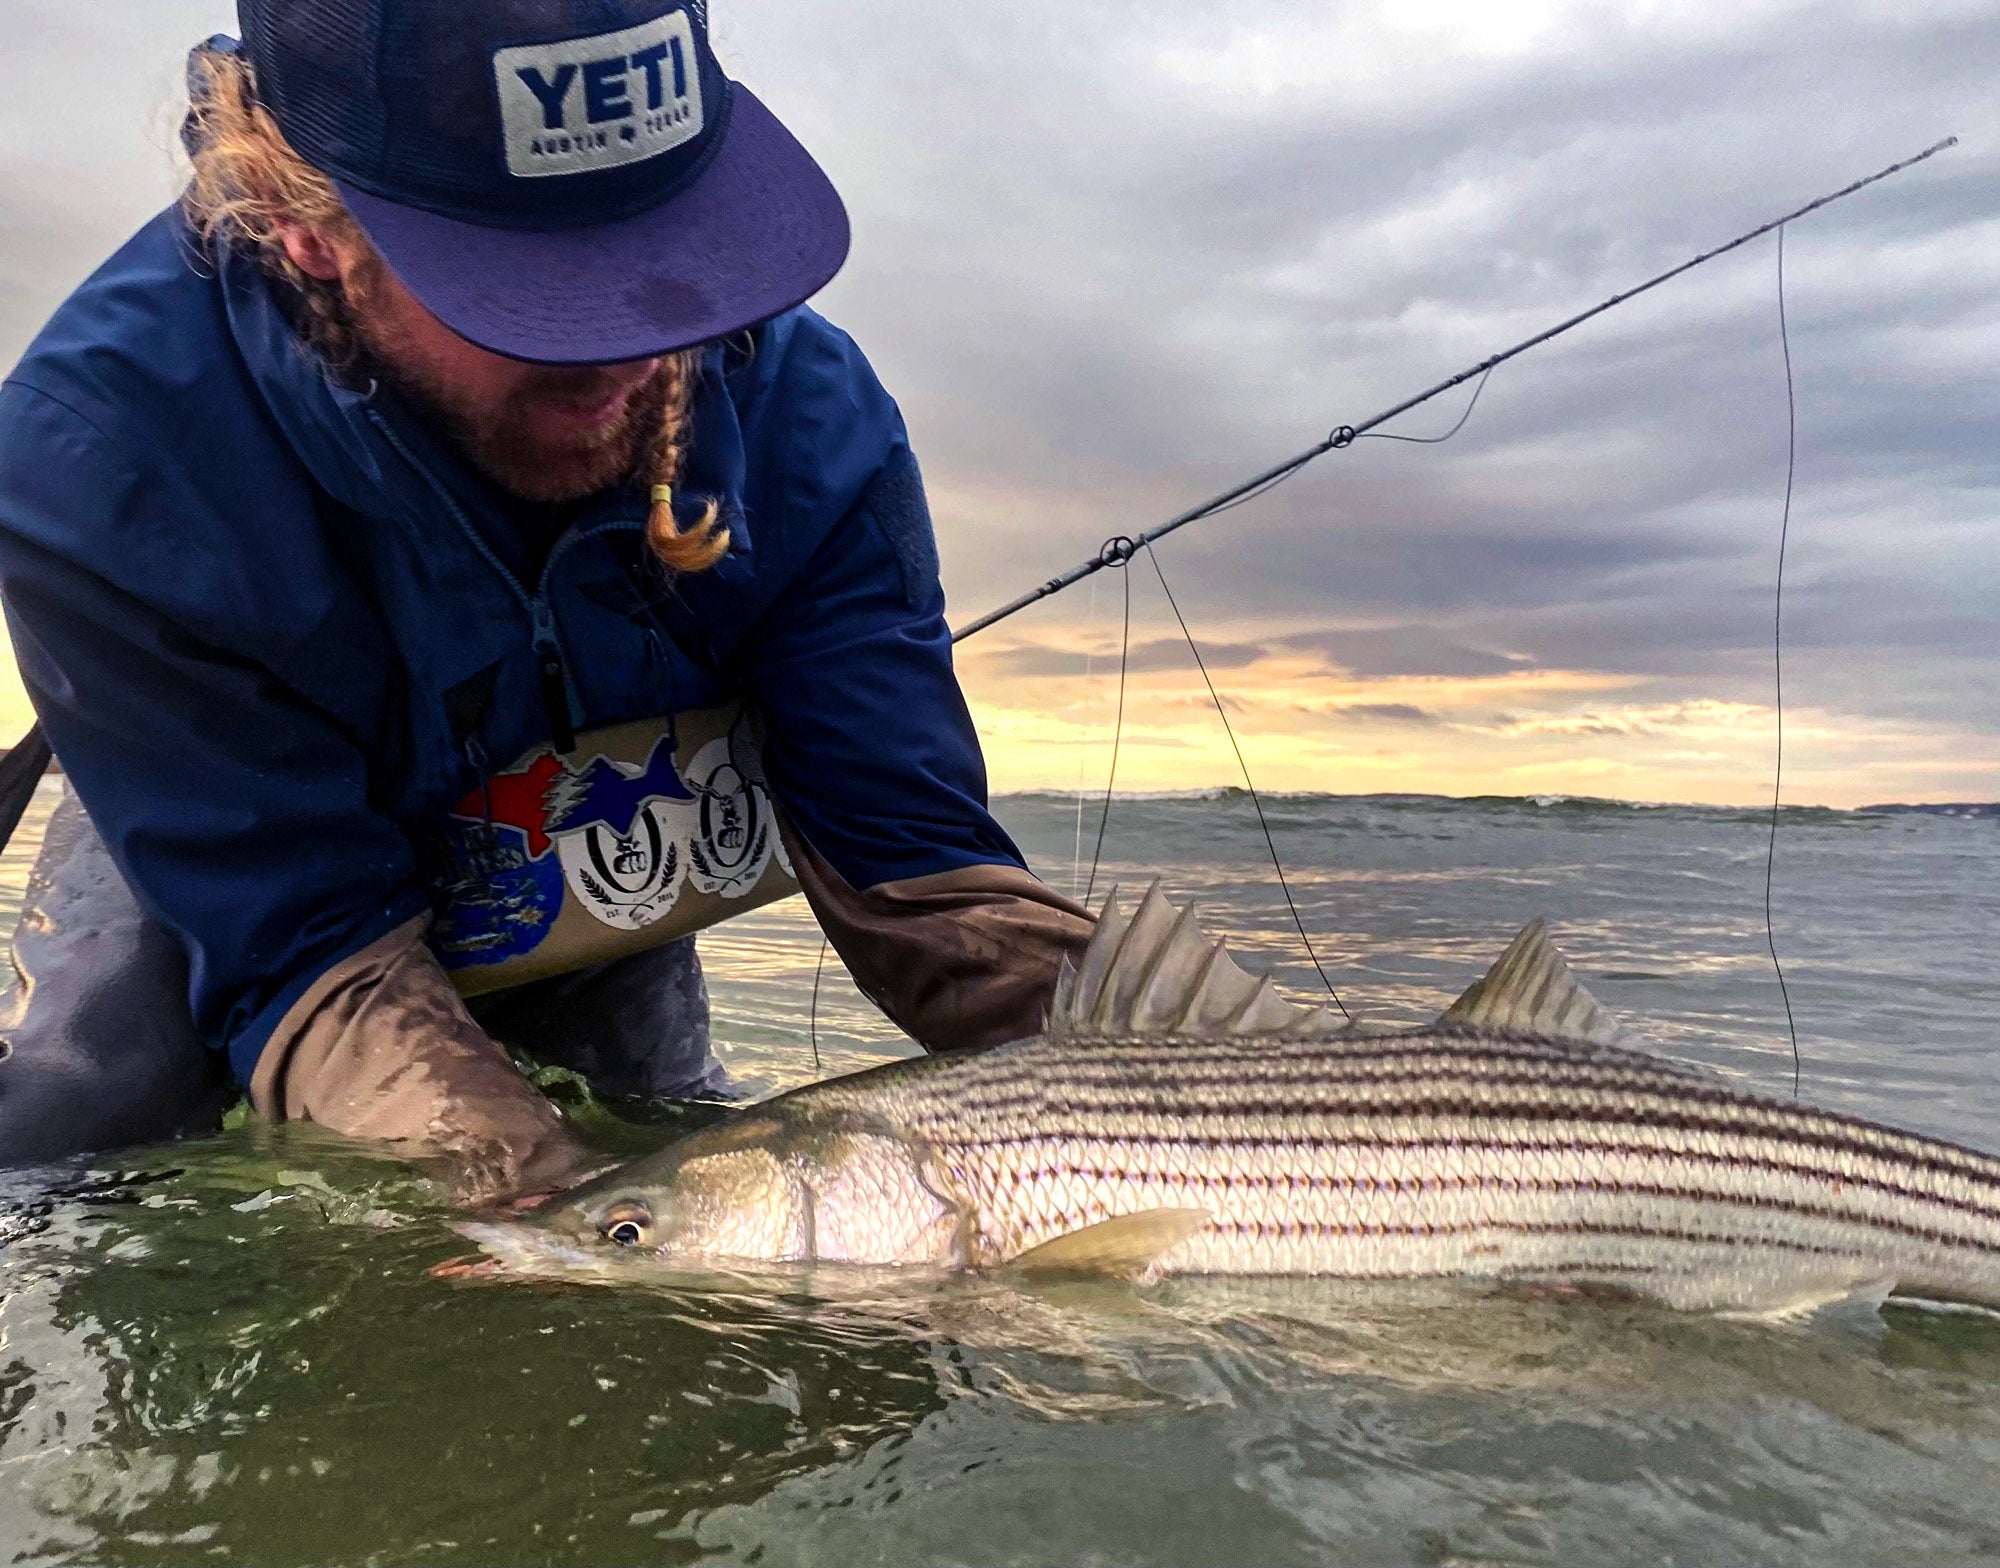 Cape Cod Fishing Report- October 13, 2022 - On The Water